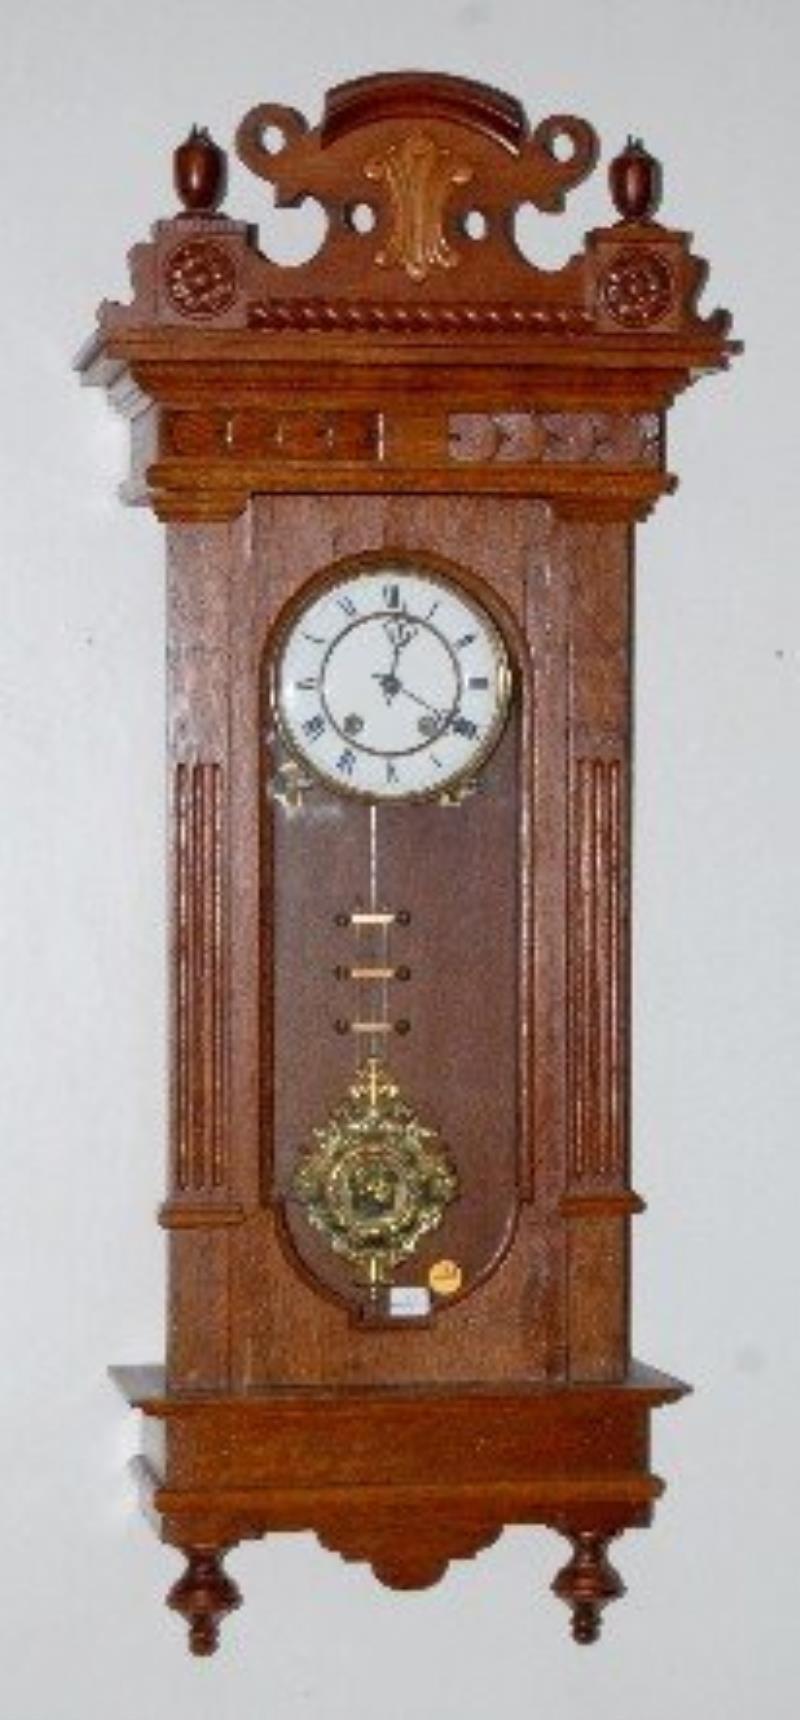 Lenzkirch “One Million” Carved RA Clock